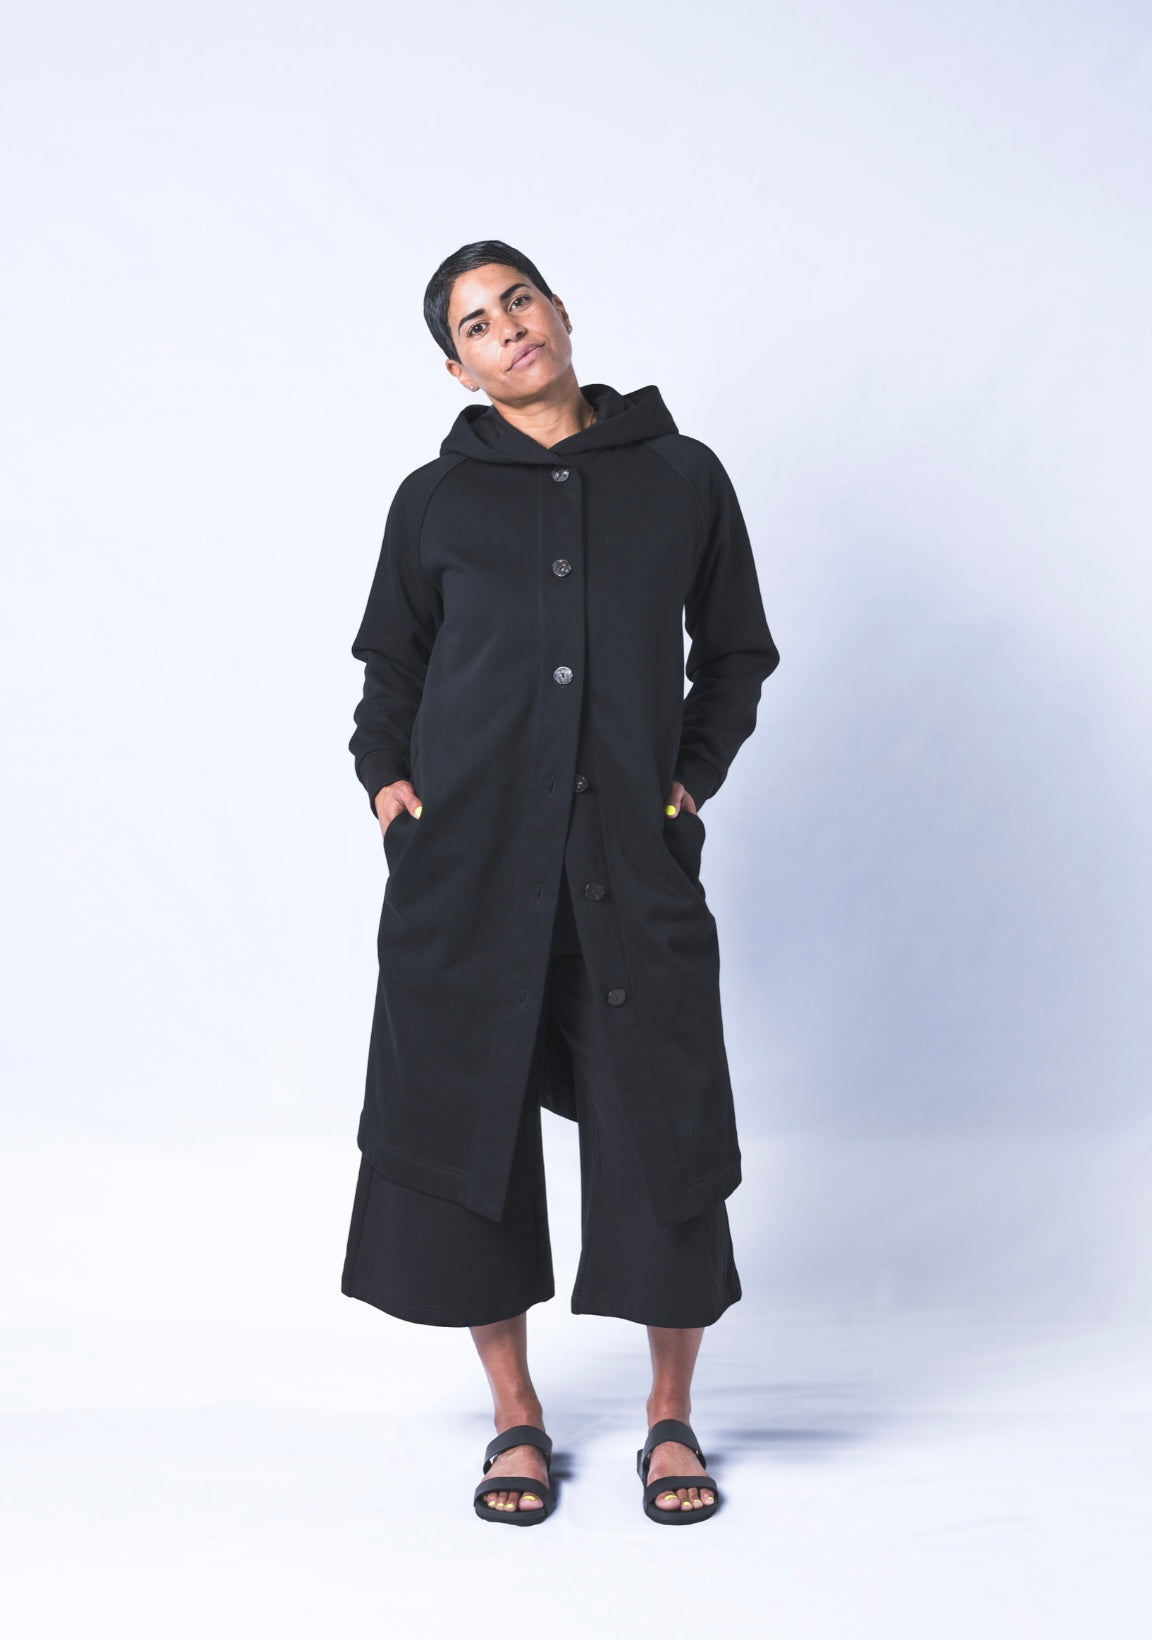 Somewhere between a cardigan and a coat...Its a Coatigan! Hand-picked black cotton poly blend fabric ensures lasting comfort no matter how many times you wash it. Features oversized hood for extra comfort and deep side pockets. Sizes Small-Large available.